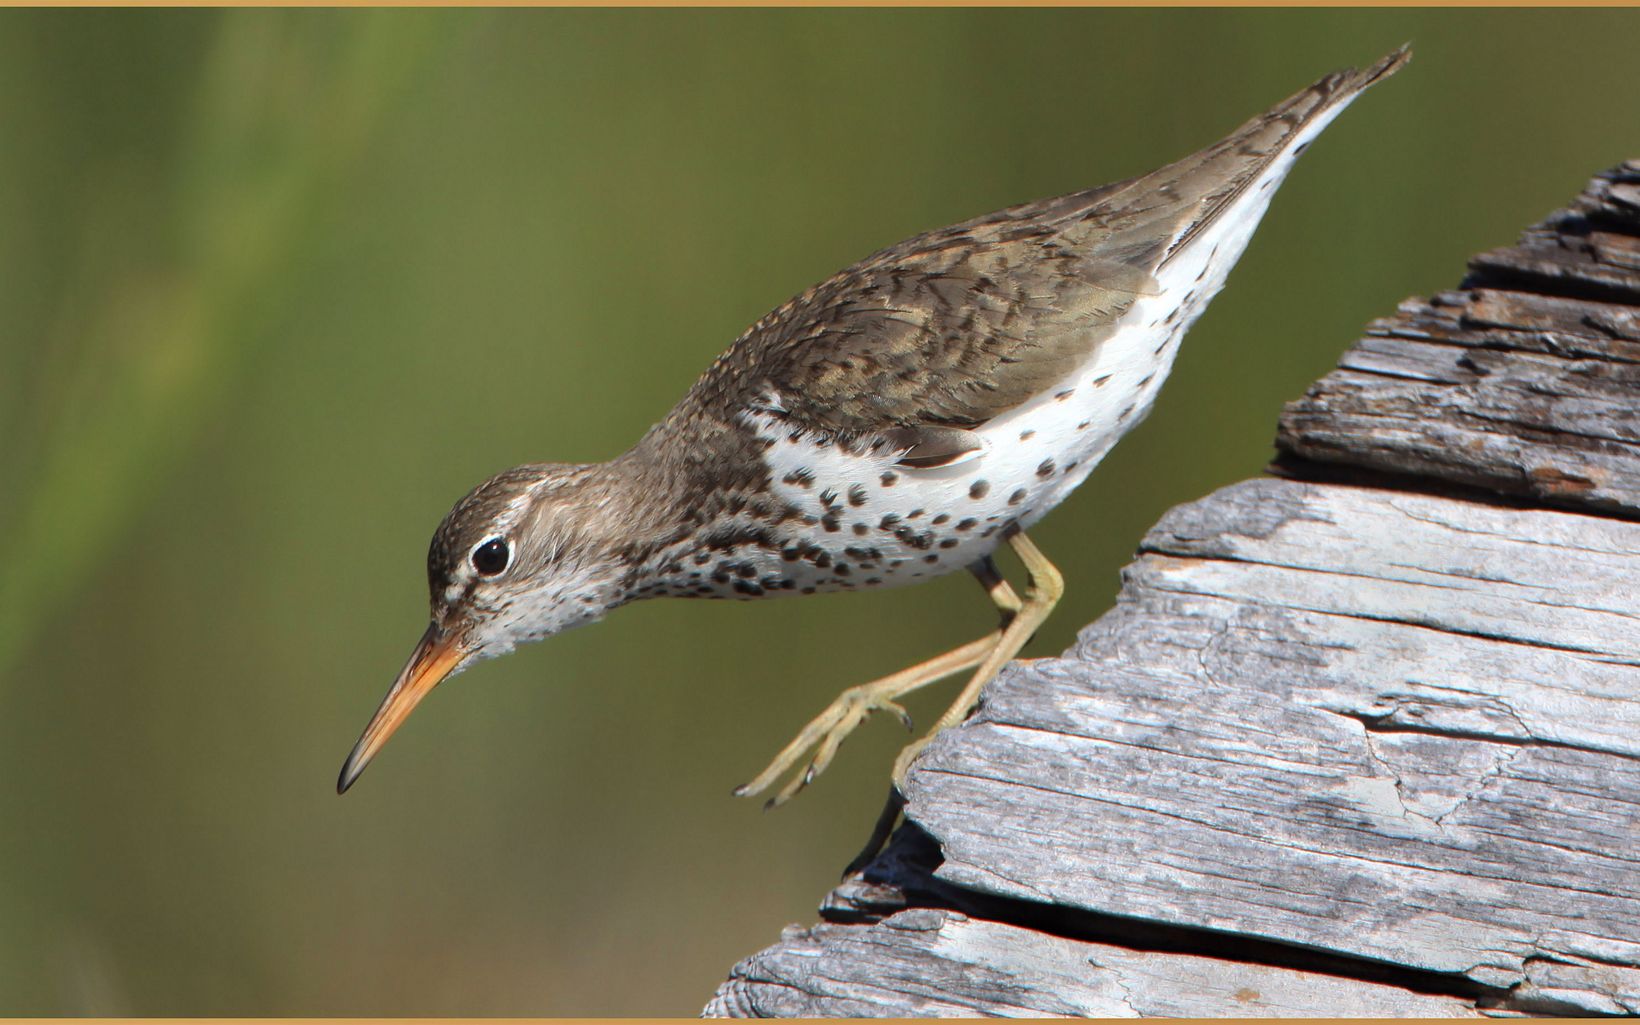 Spotted Sandpiper  The spotted sandpiper isn’t seen in large numbers in the spring—and even then the recorded numbers vary quite a bit from year to year. © Flickr user Nigel (CC by 2.0)